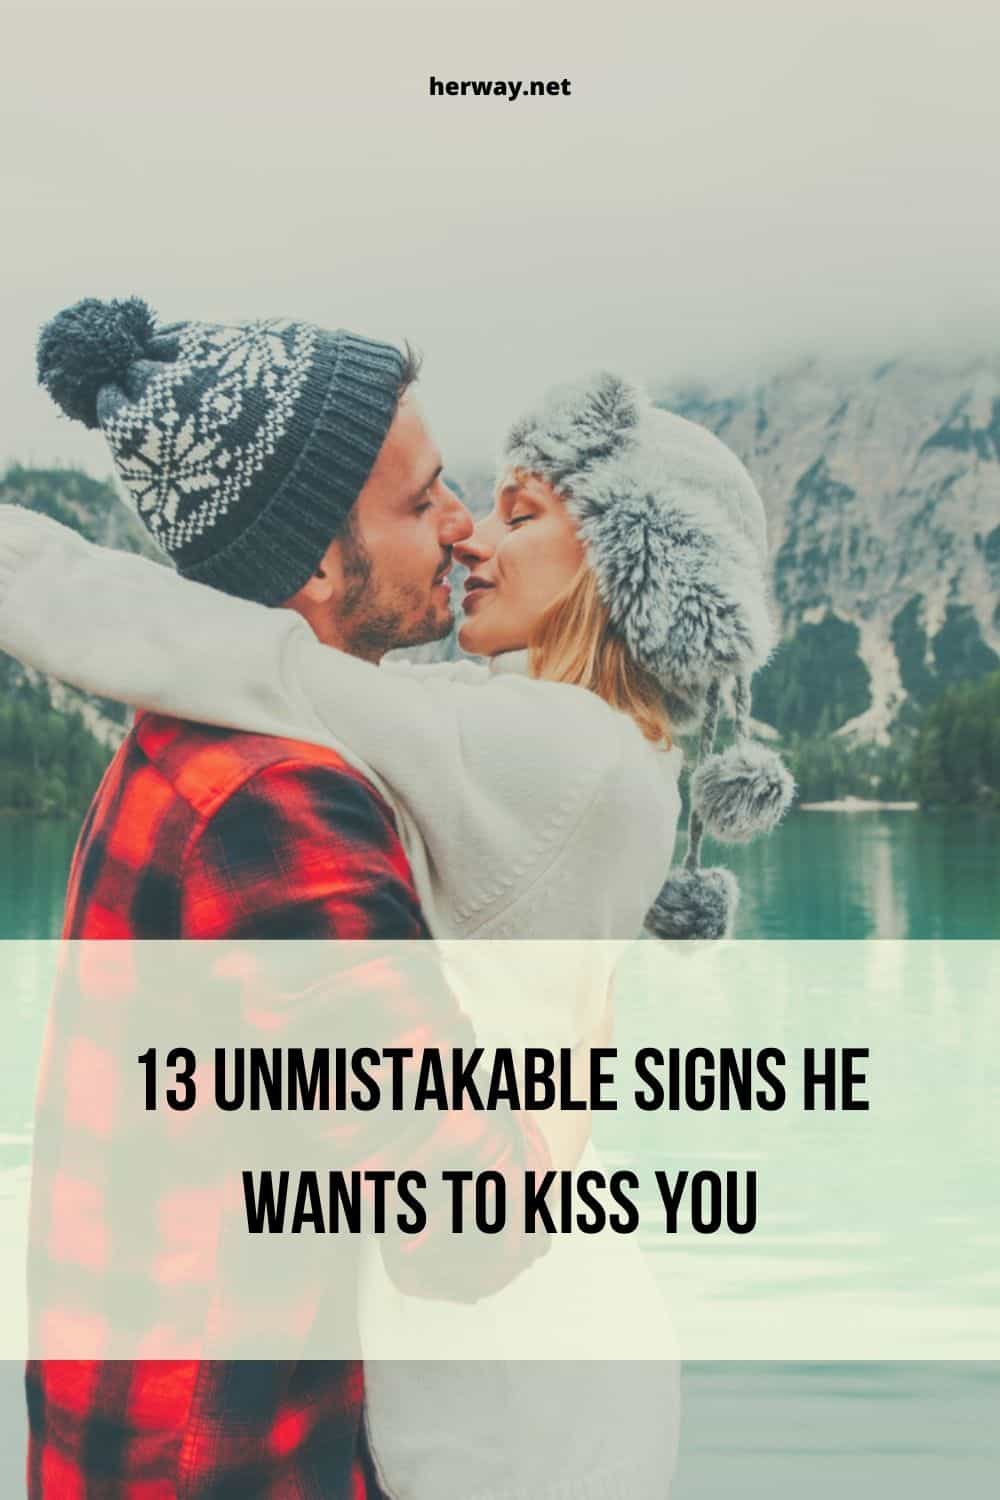 What does it mean if a guy kisses you on the first date?